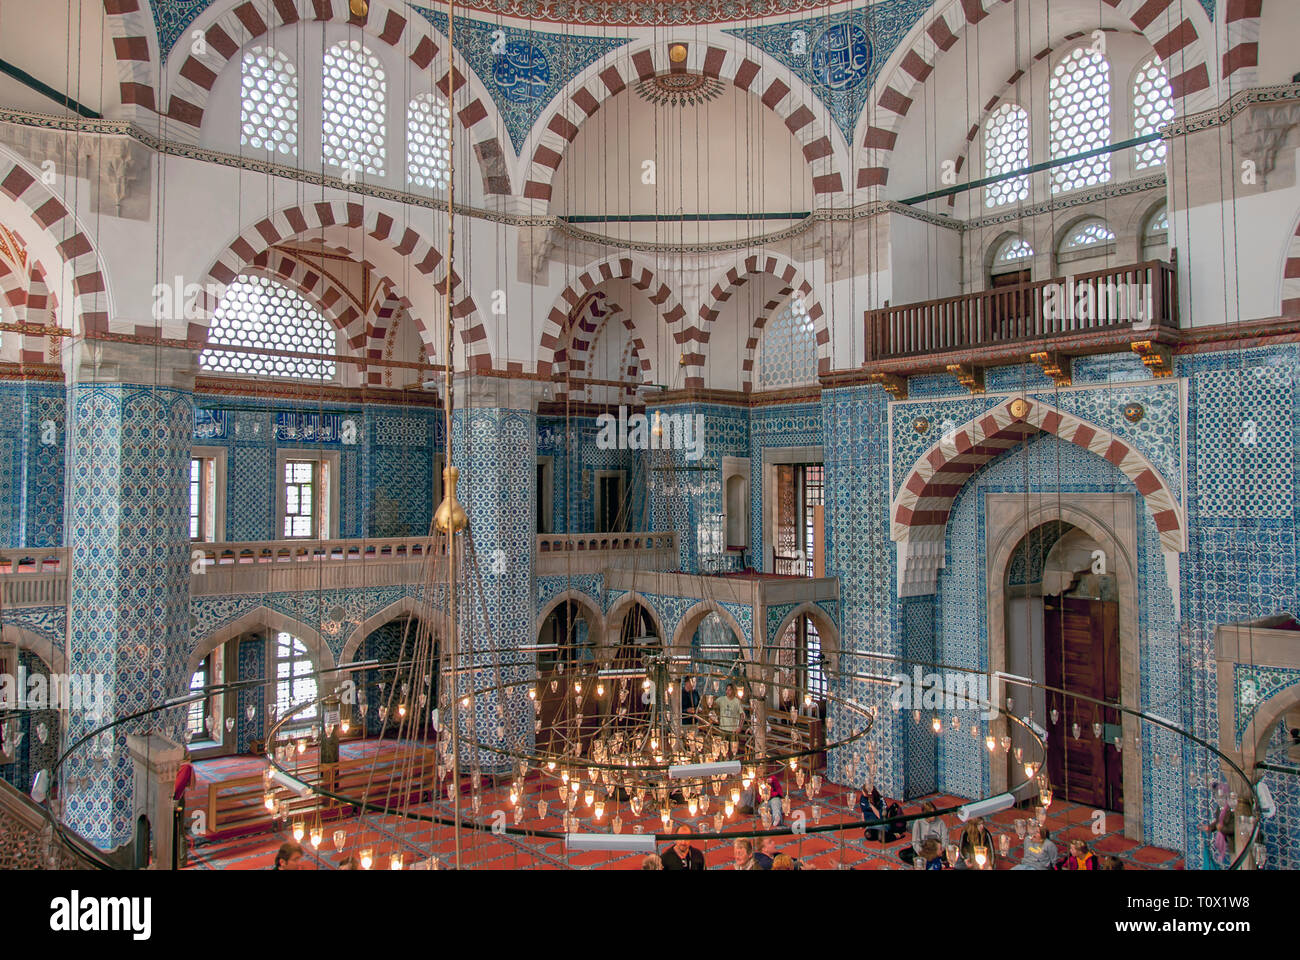 istanbul turkey 25 april 2006 rustem pasha mosque is an ottoman mosque in the eminonu district of istanbul stock photo alamy